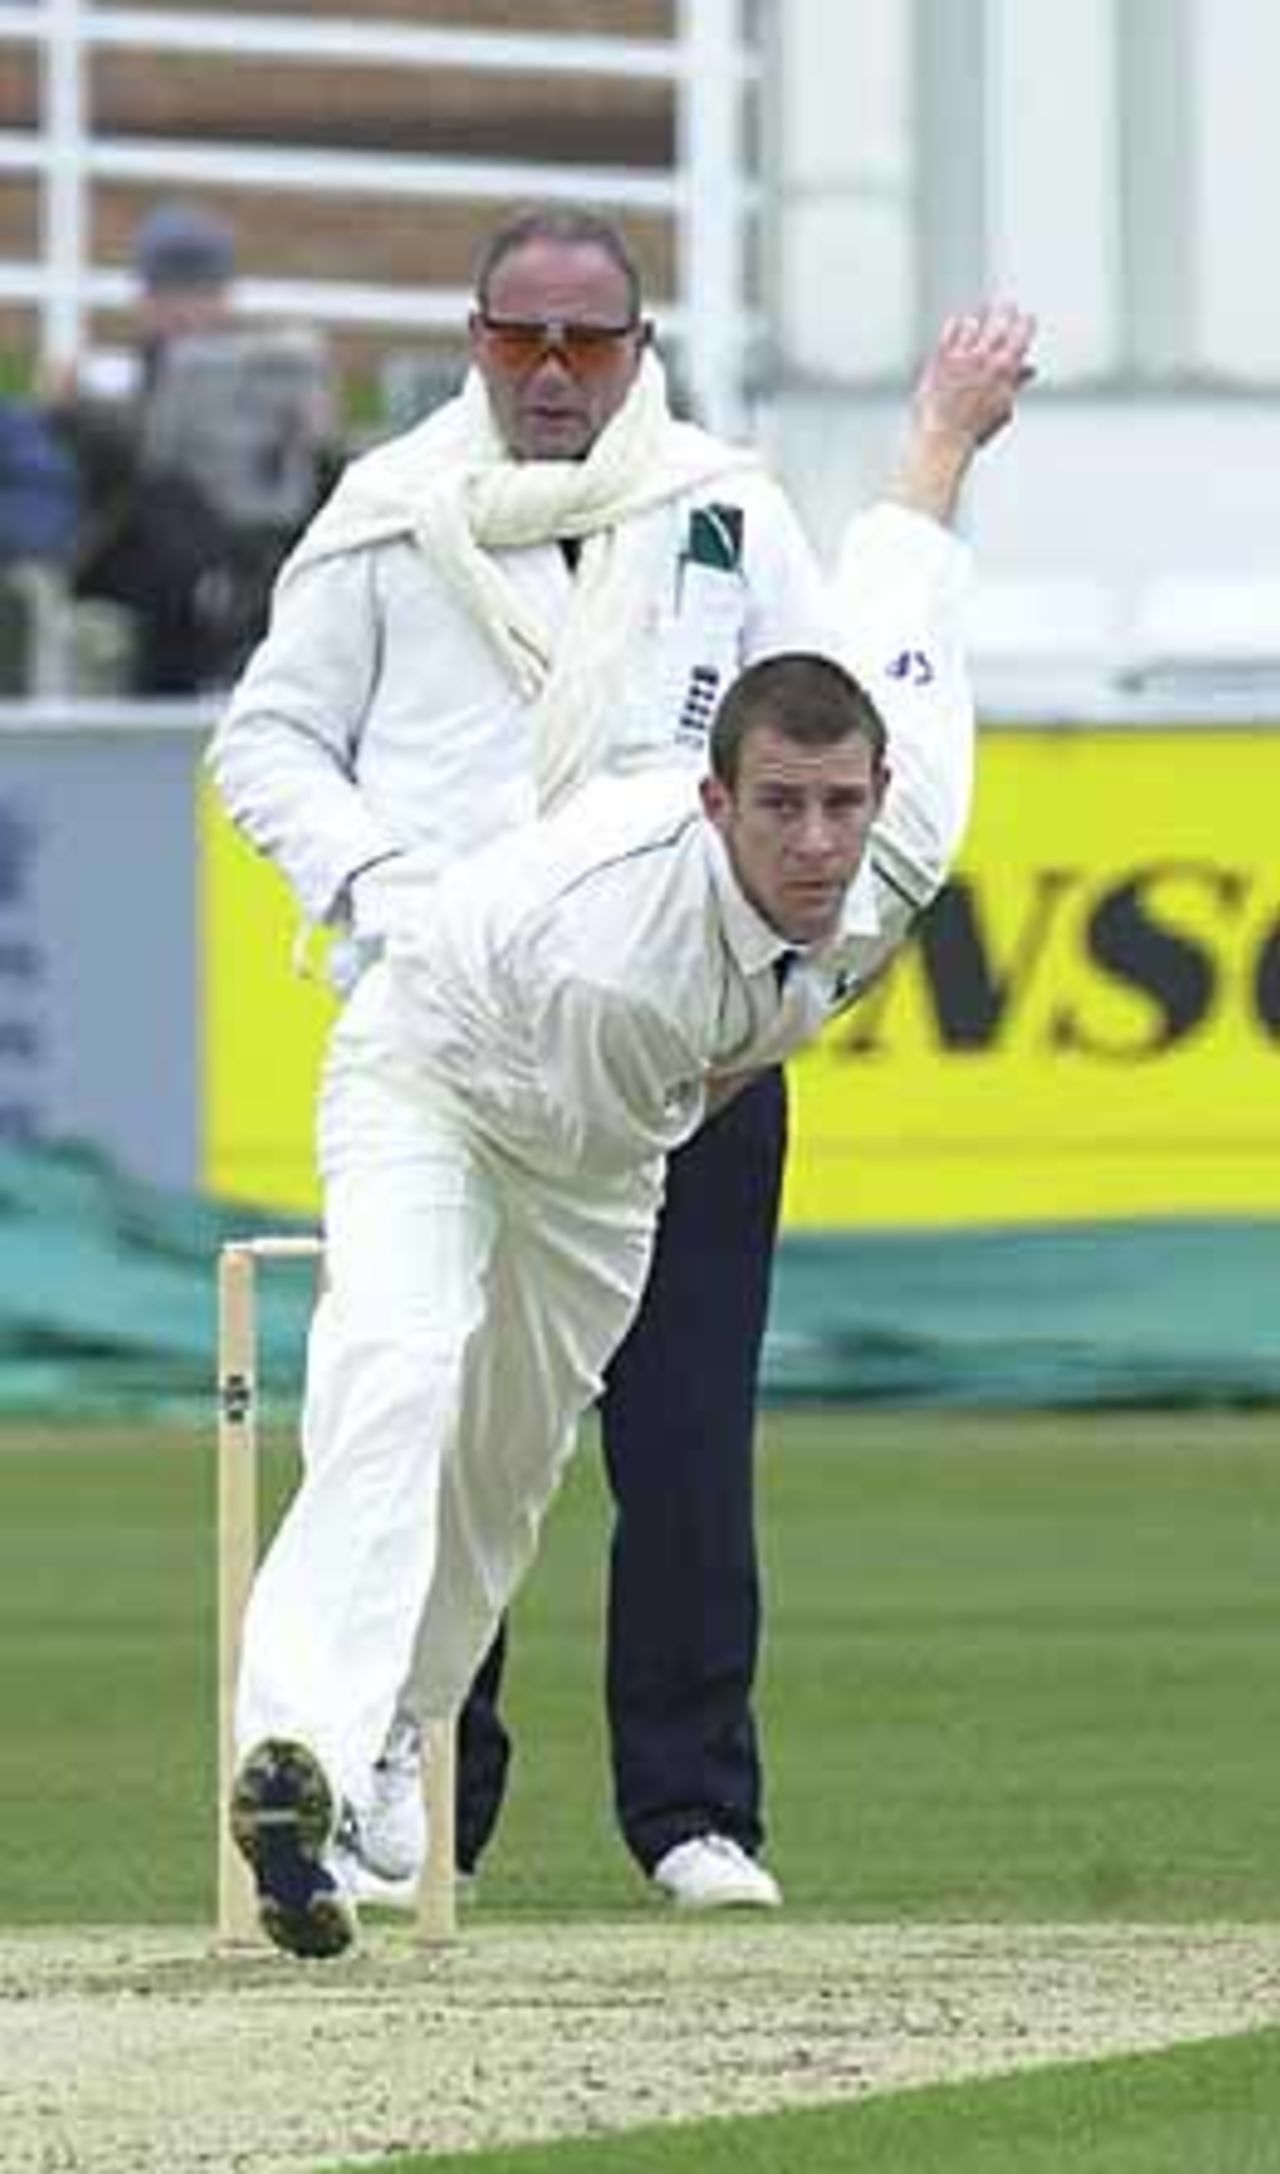 Durham v Nottinghamshire, Benson and Hedges Cup, Northern Division, 4th May 2001 at The Riverside